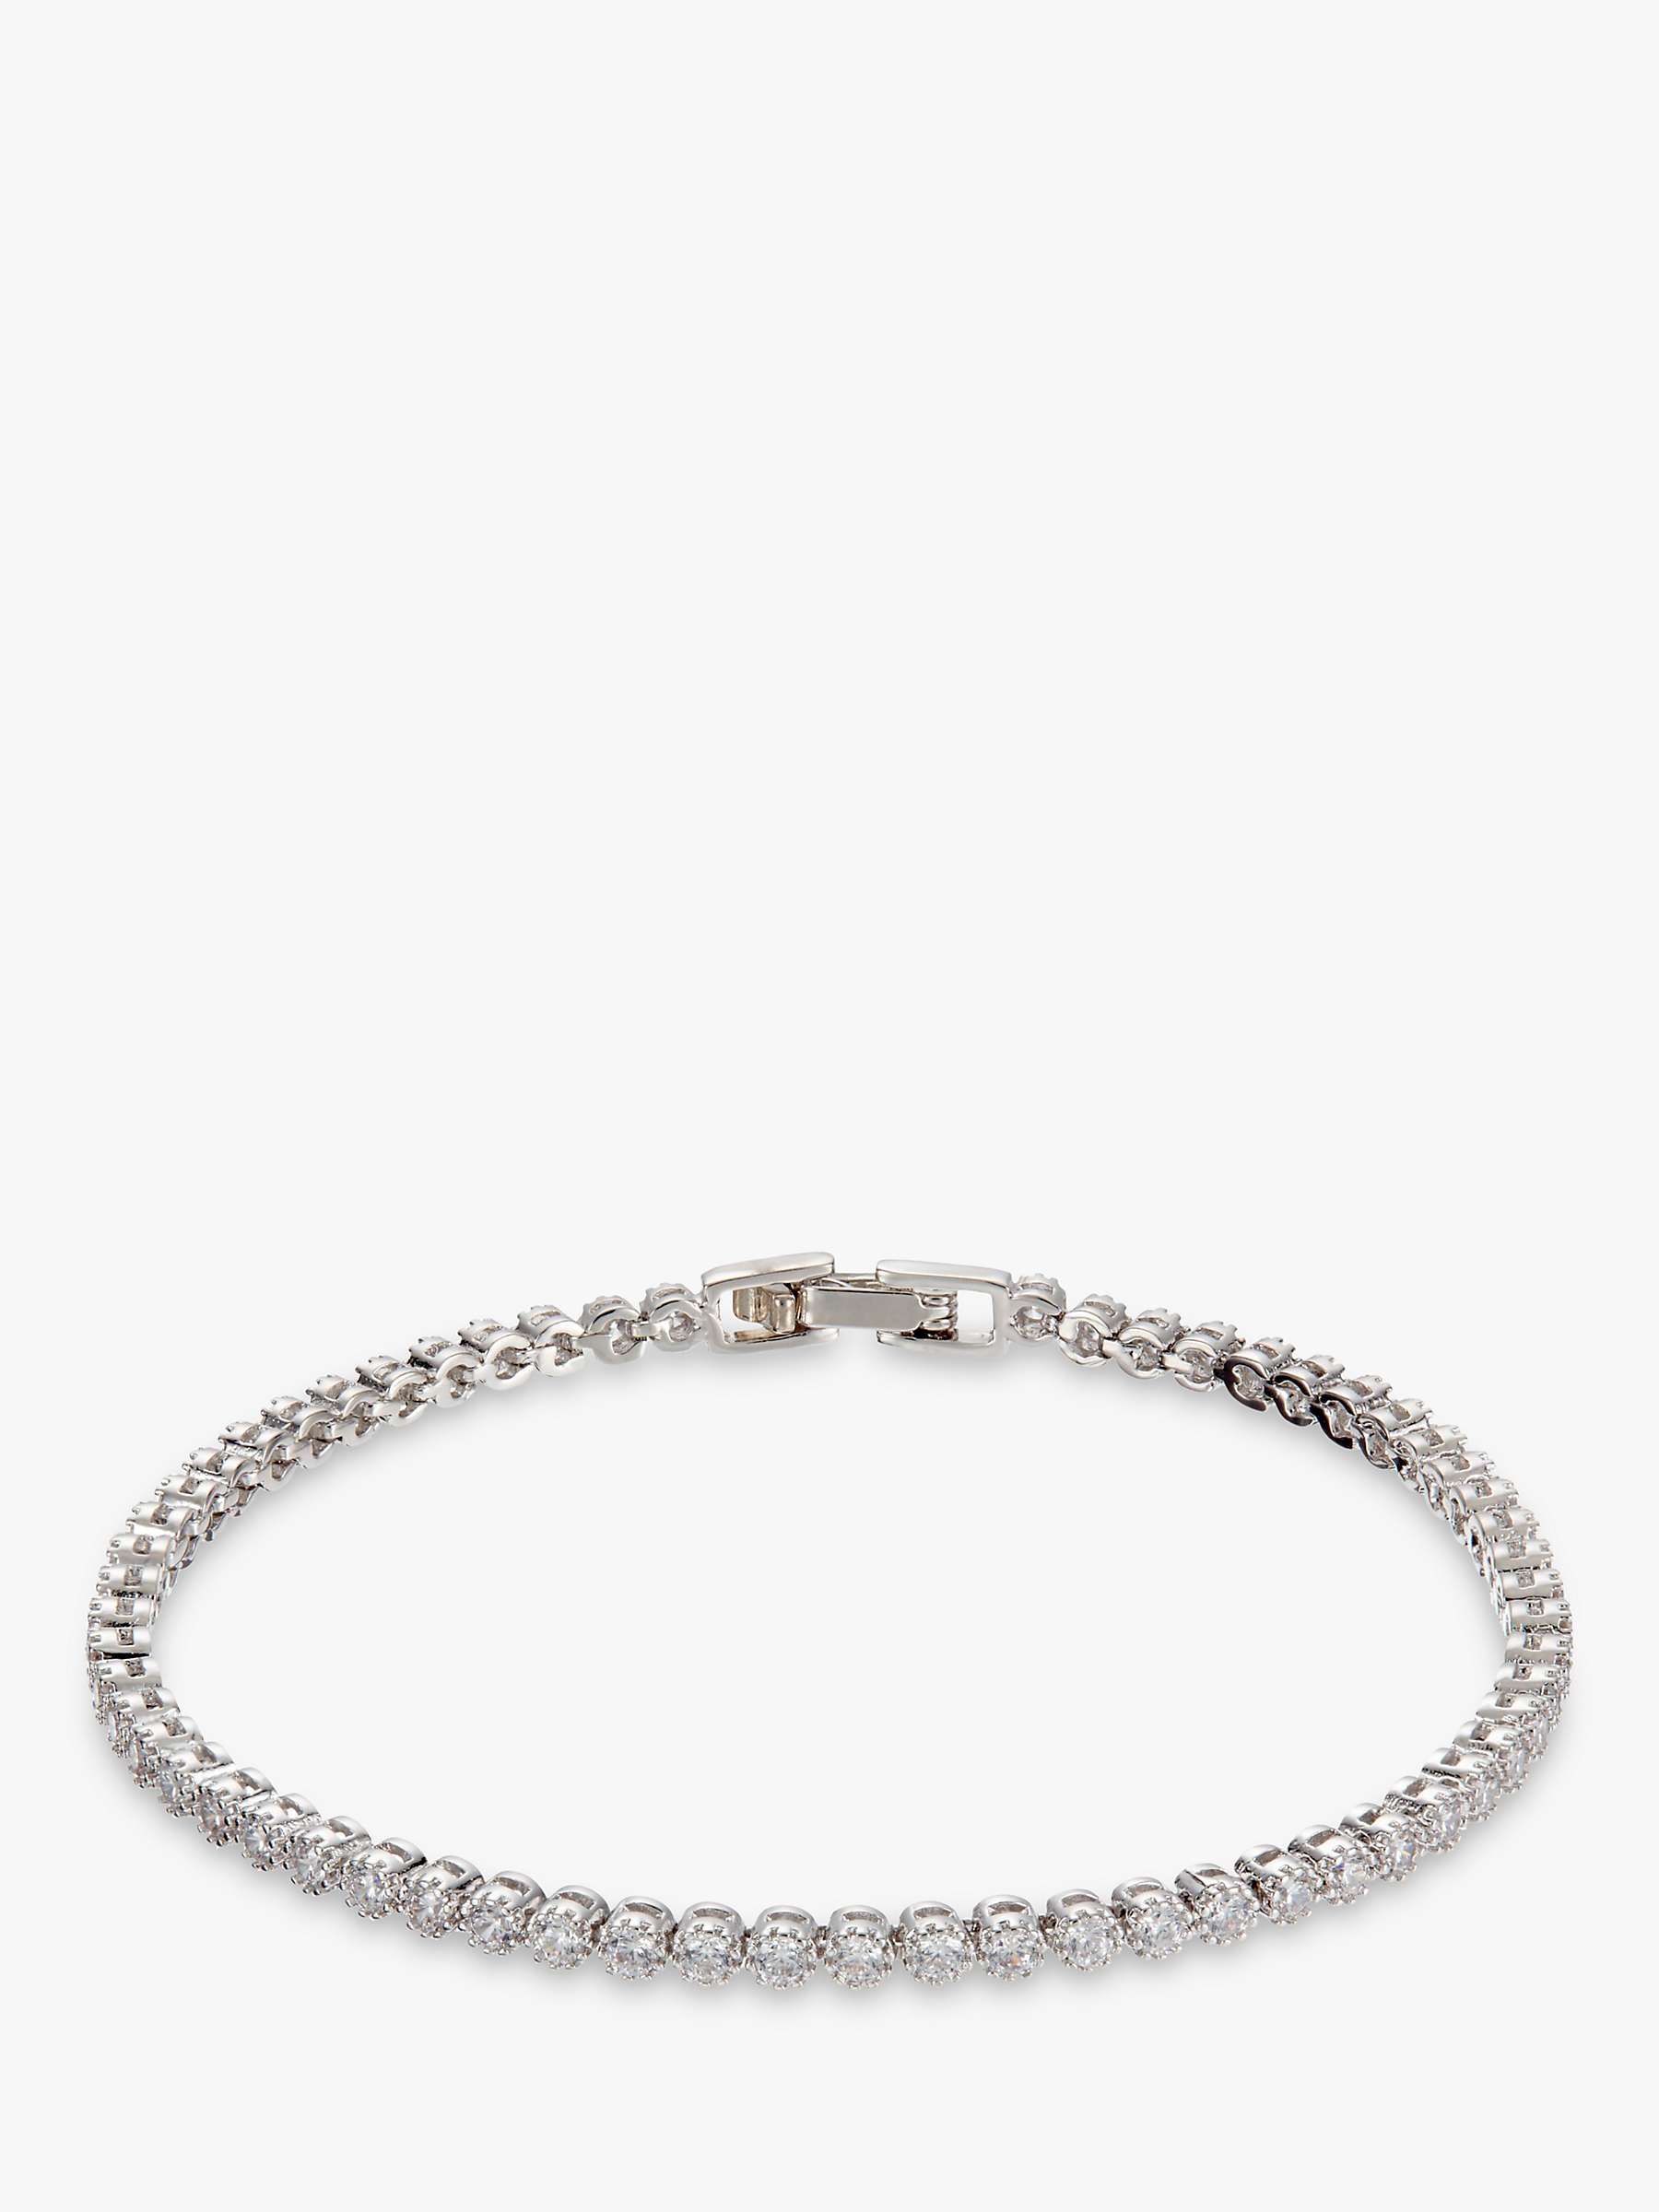 Buy Ivory & Co. Silhouette Round Cubic Zirconia Tennis Bracelet, Silver Online at johnlewis.com